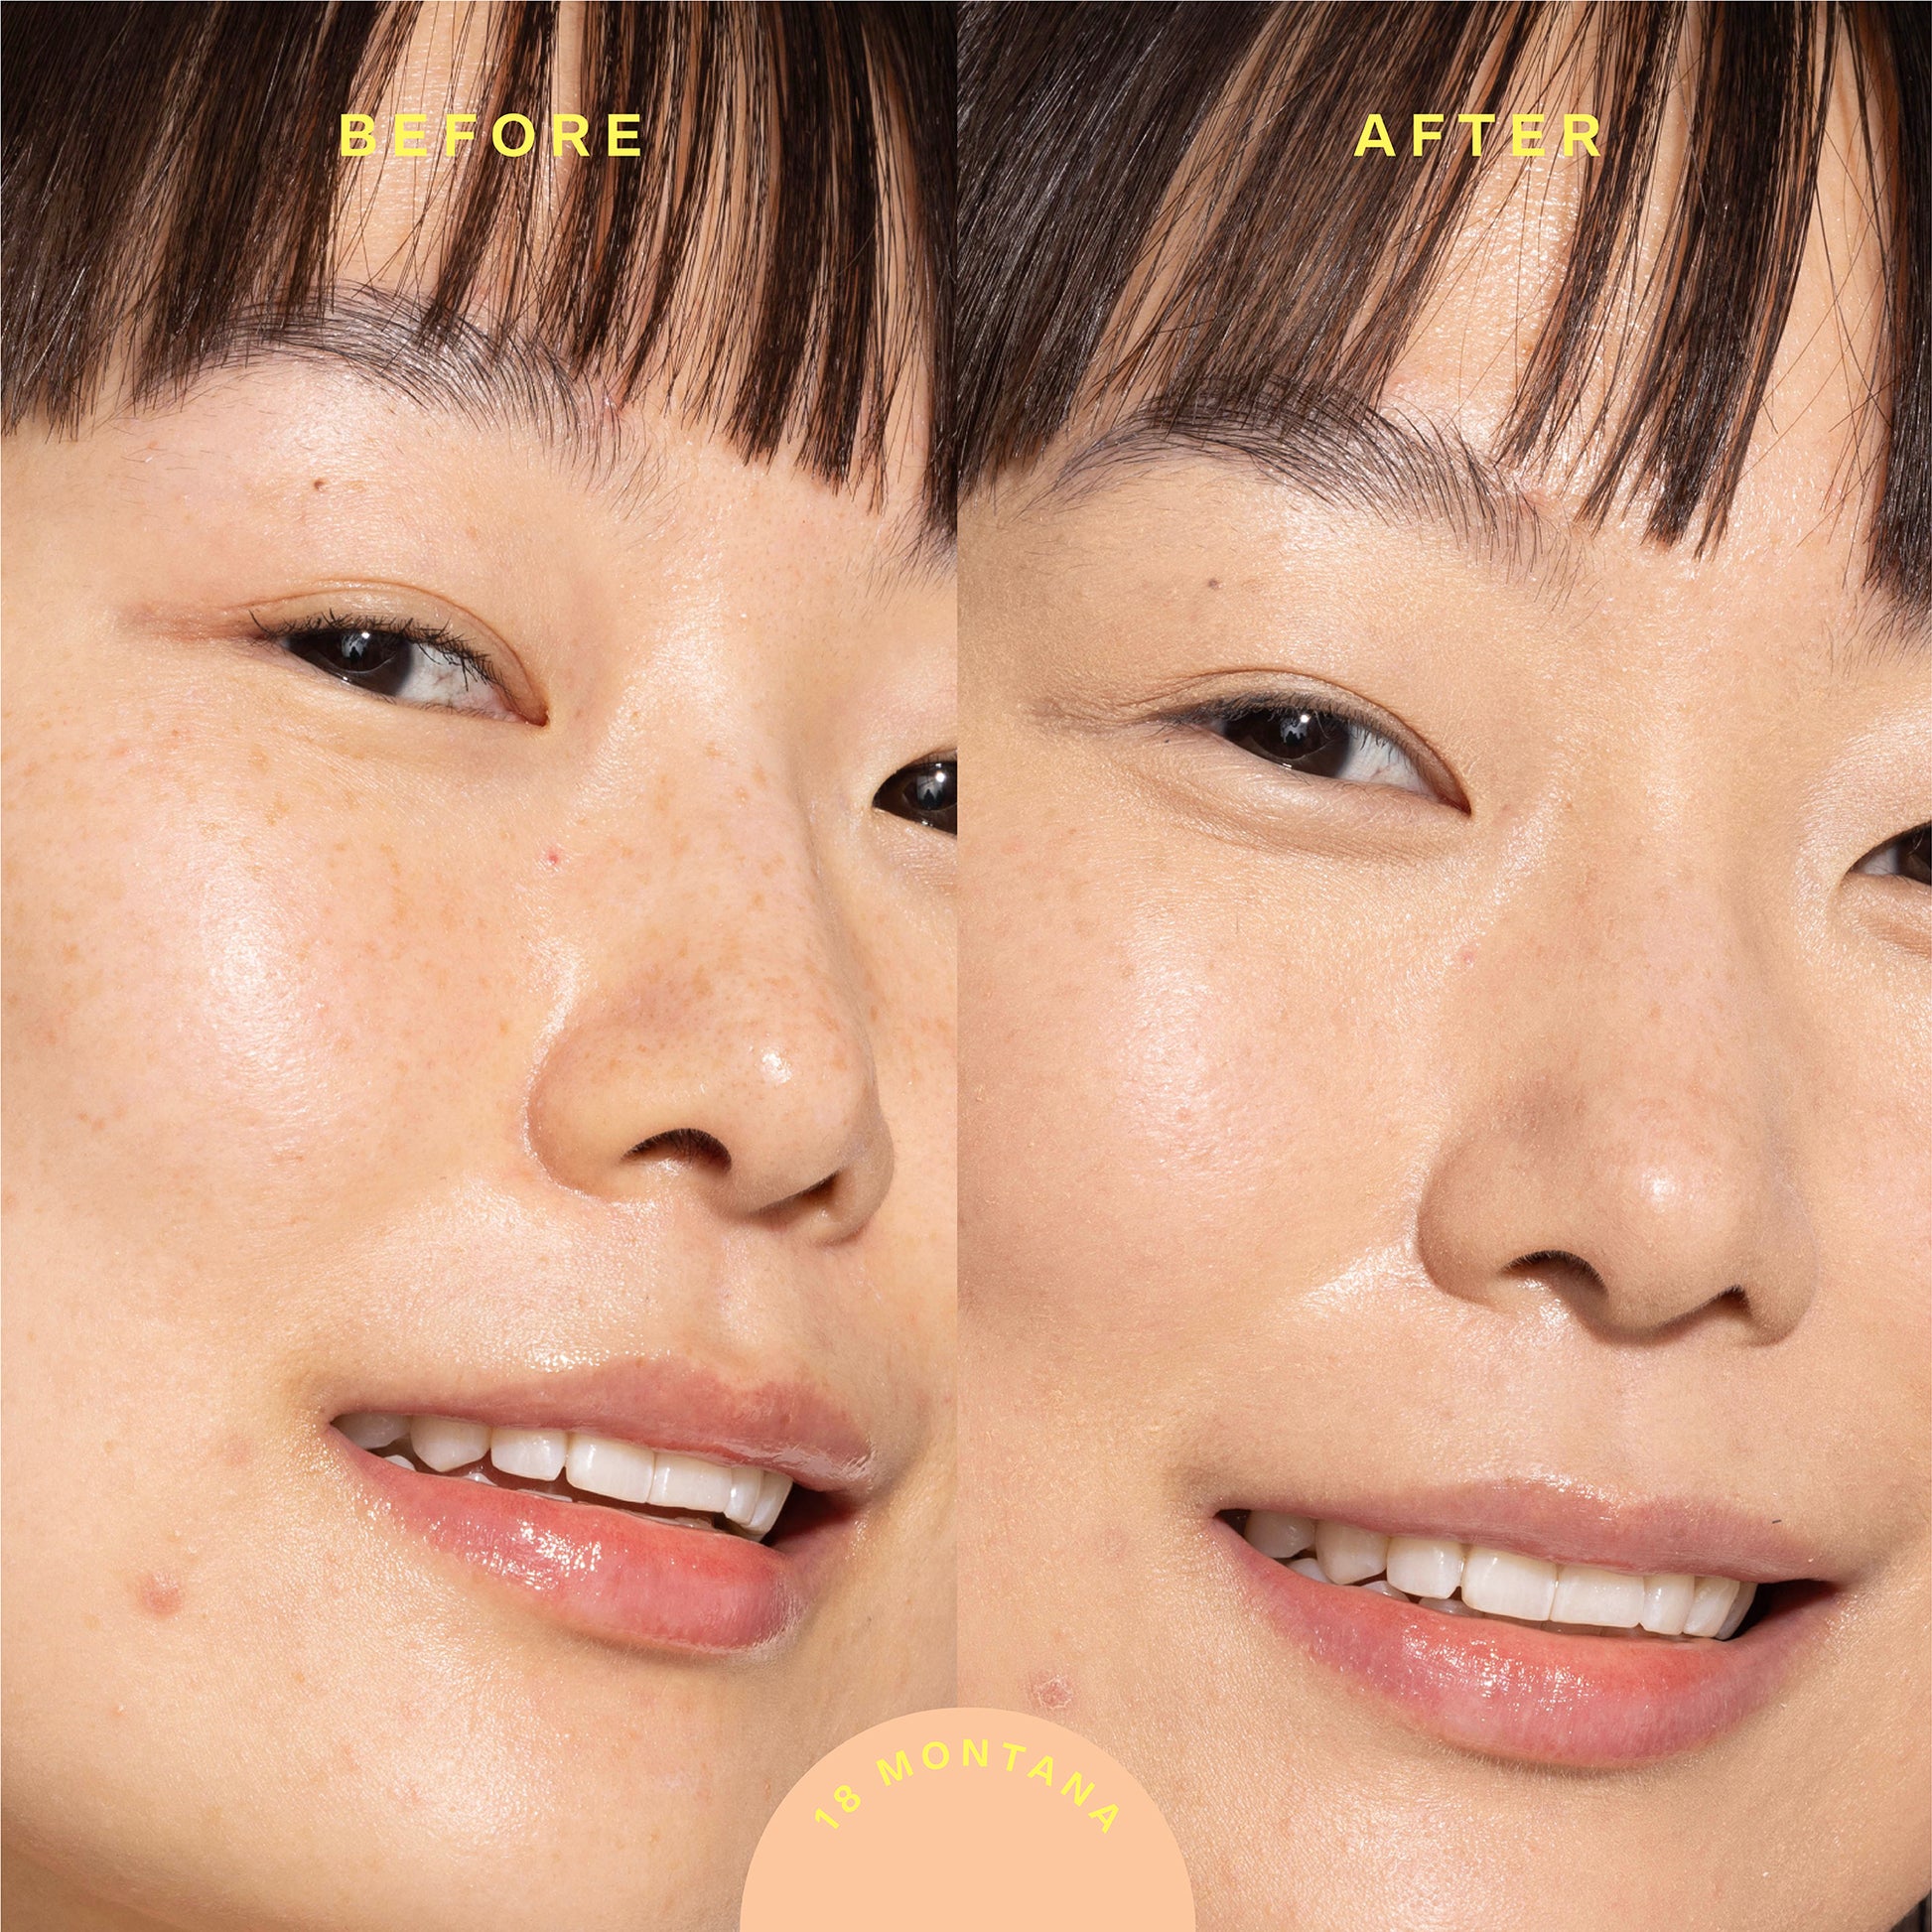 A model before (left image) and after (right image) applyingTower 28 Beauty SunnyDays™ Tinted SPF 30 in the shade 18 Montana